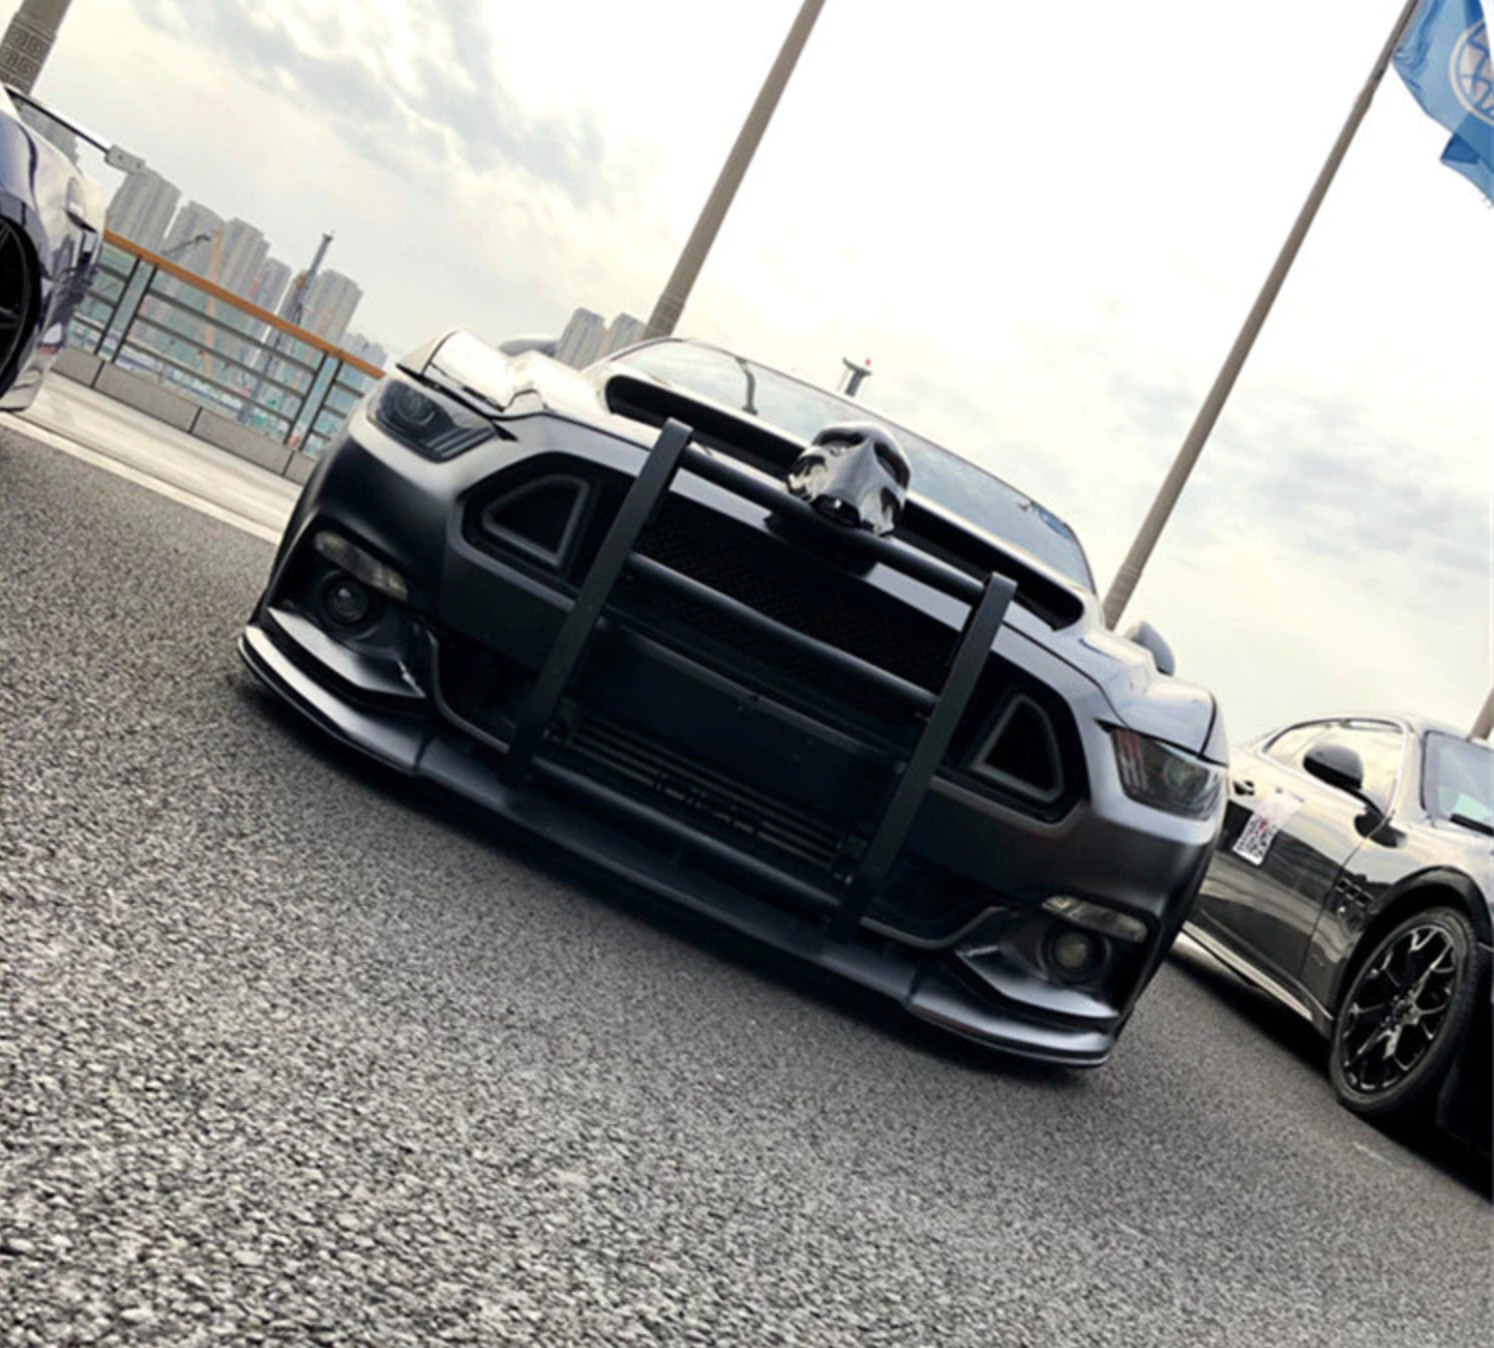 Ford Mustang 6th Generation Aluminium Bull Bar Protection Kit - Inspired by CTS this product offers protection to the front bumper of your Ford Mustang while also adding style and aggression. this product will enhance the front bumper of your Mustang and also protect you from collisions. 